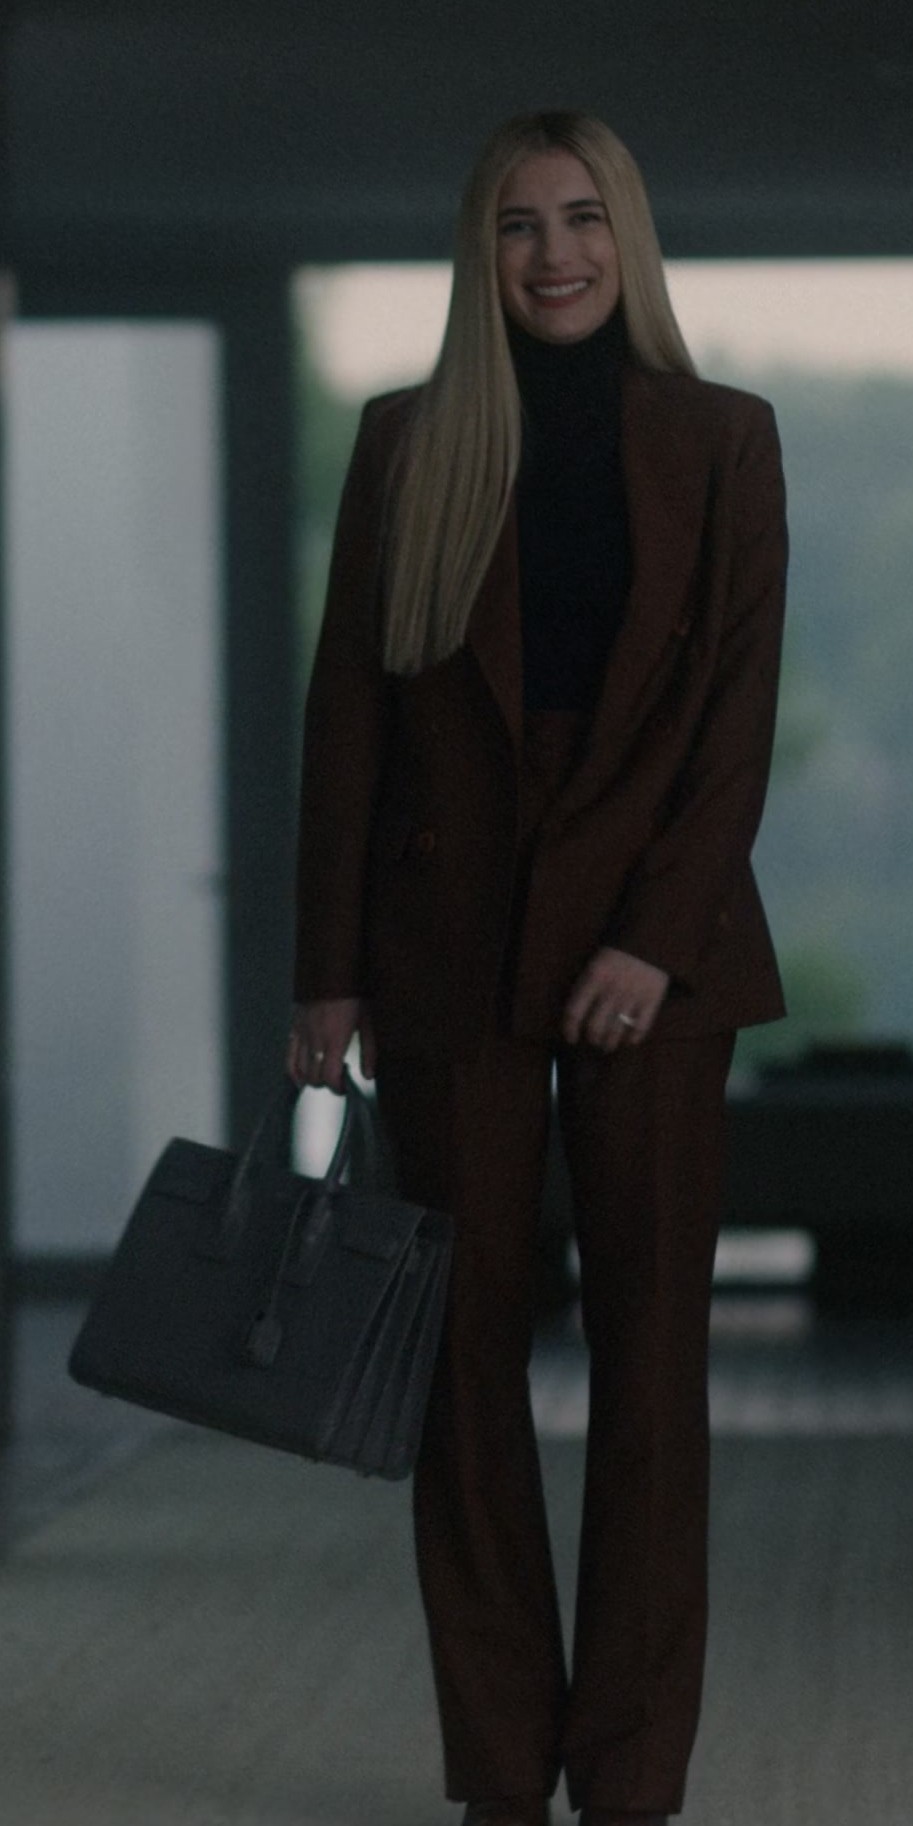 Worn on American Horror Story TV Show - Elegant Rust-Brown Tailored Blazer and Matching Trousers of Emma Roberts as Anna Victoria Alcott